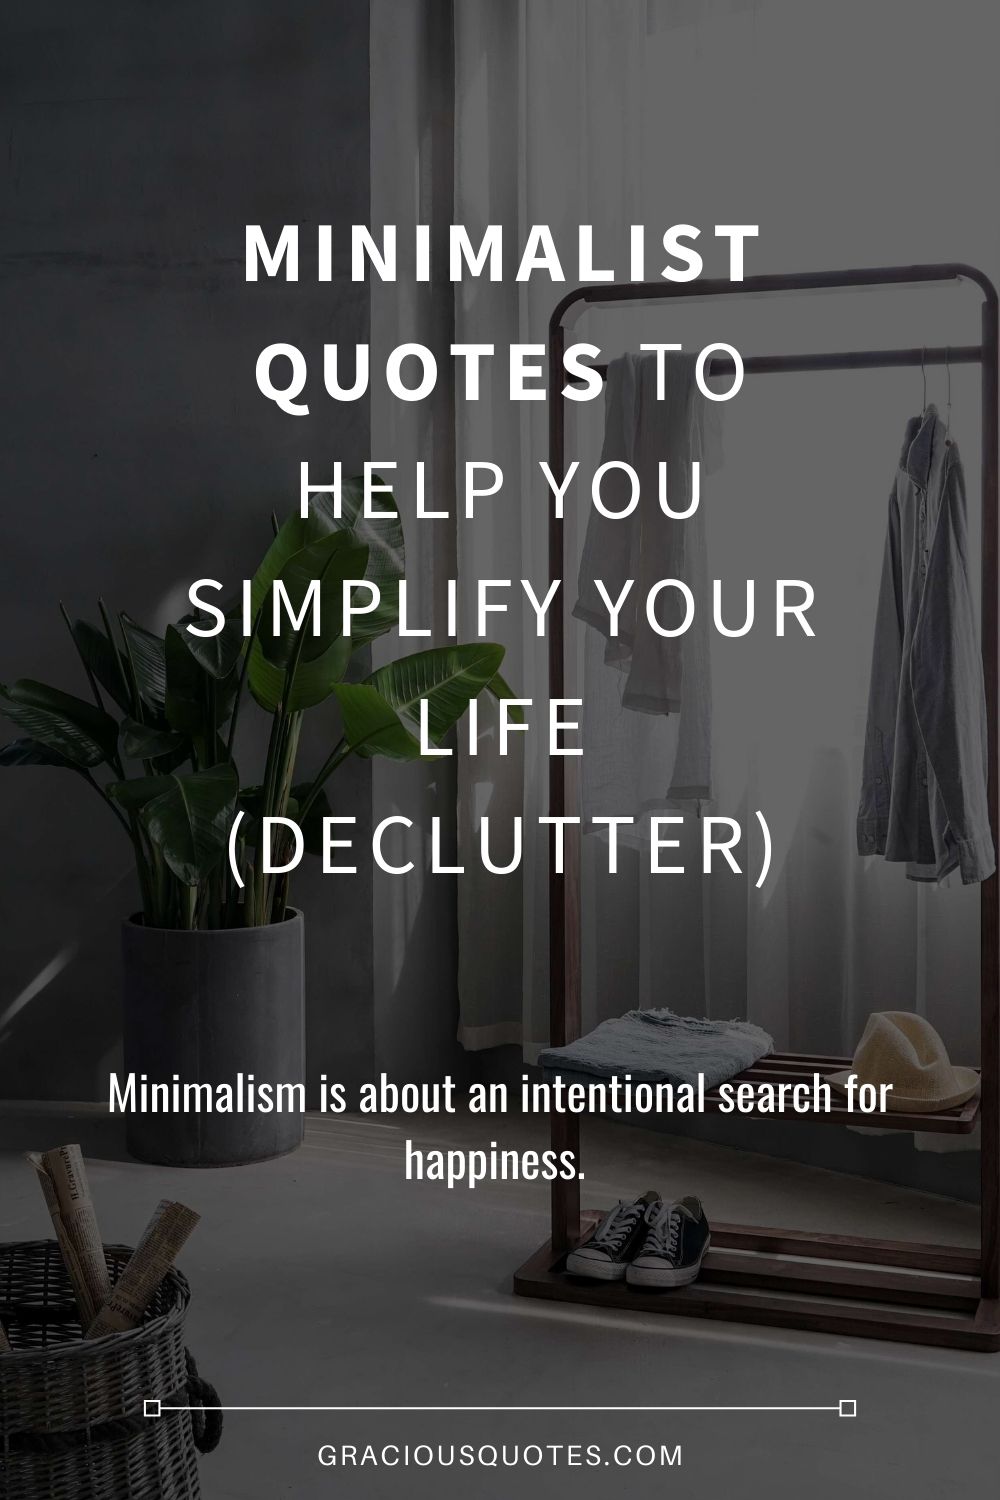 Minimalist-Quotes-to-Help-You-Simplify-Your-Life-DECLUTTER-Gracious-Quotes